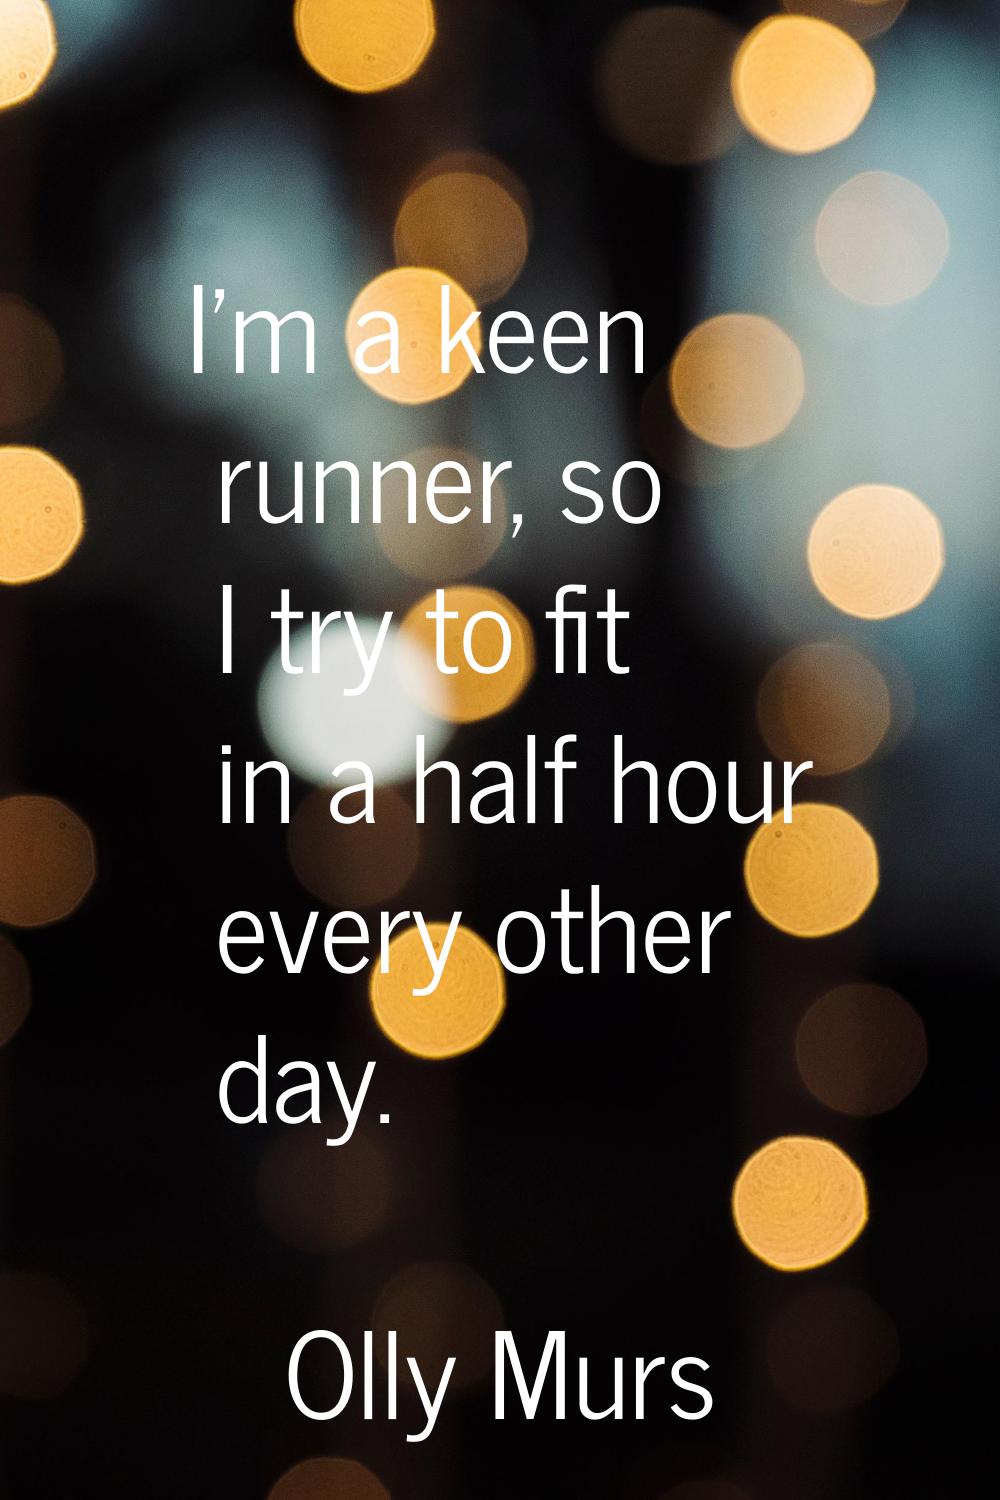 I'm a keen runner, so I try to fit in a half hour every other day.